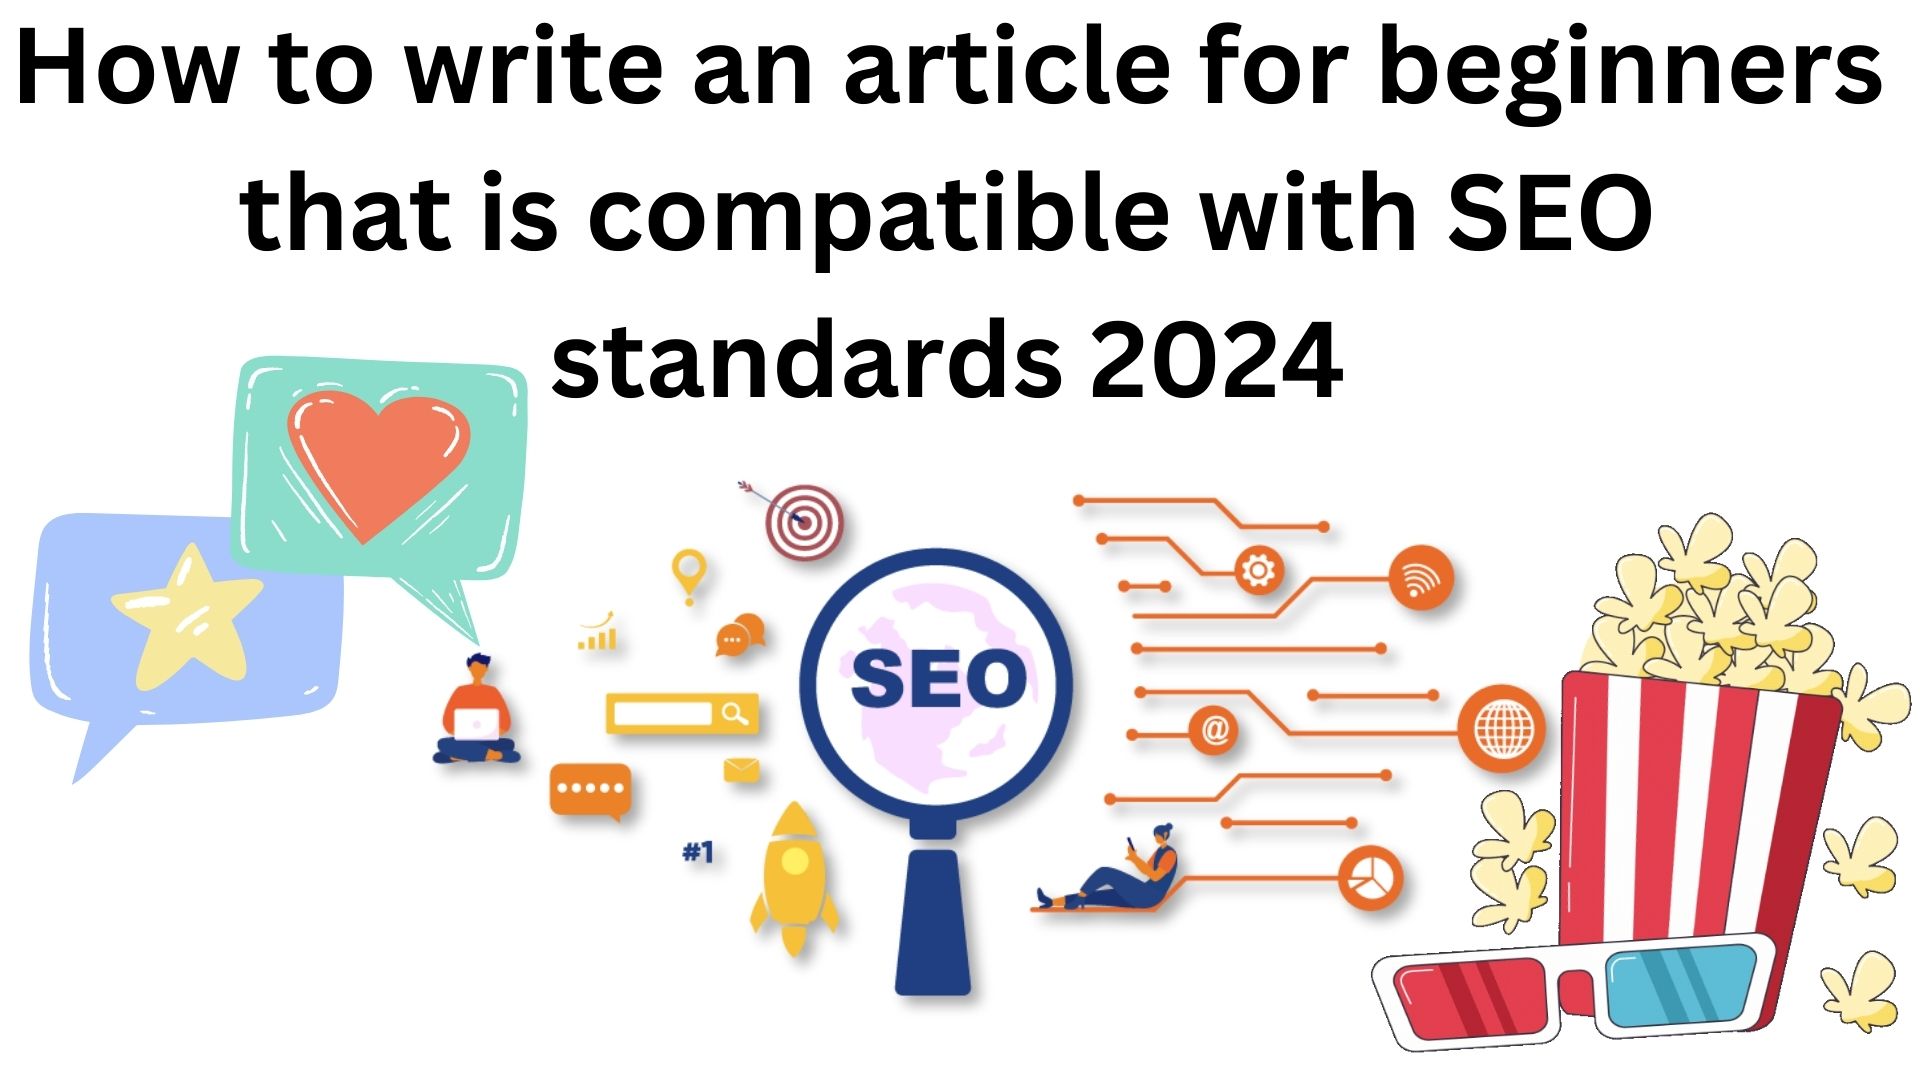 How To Write An Article For Beginners That Is Compatible With Seo Standards 2024